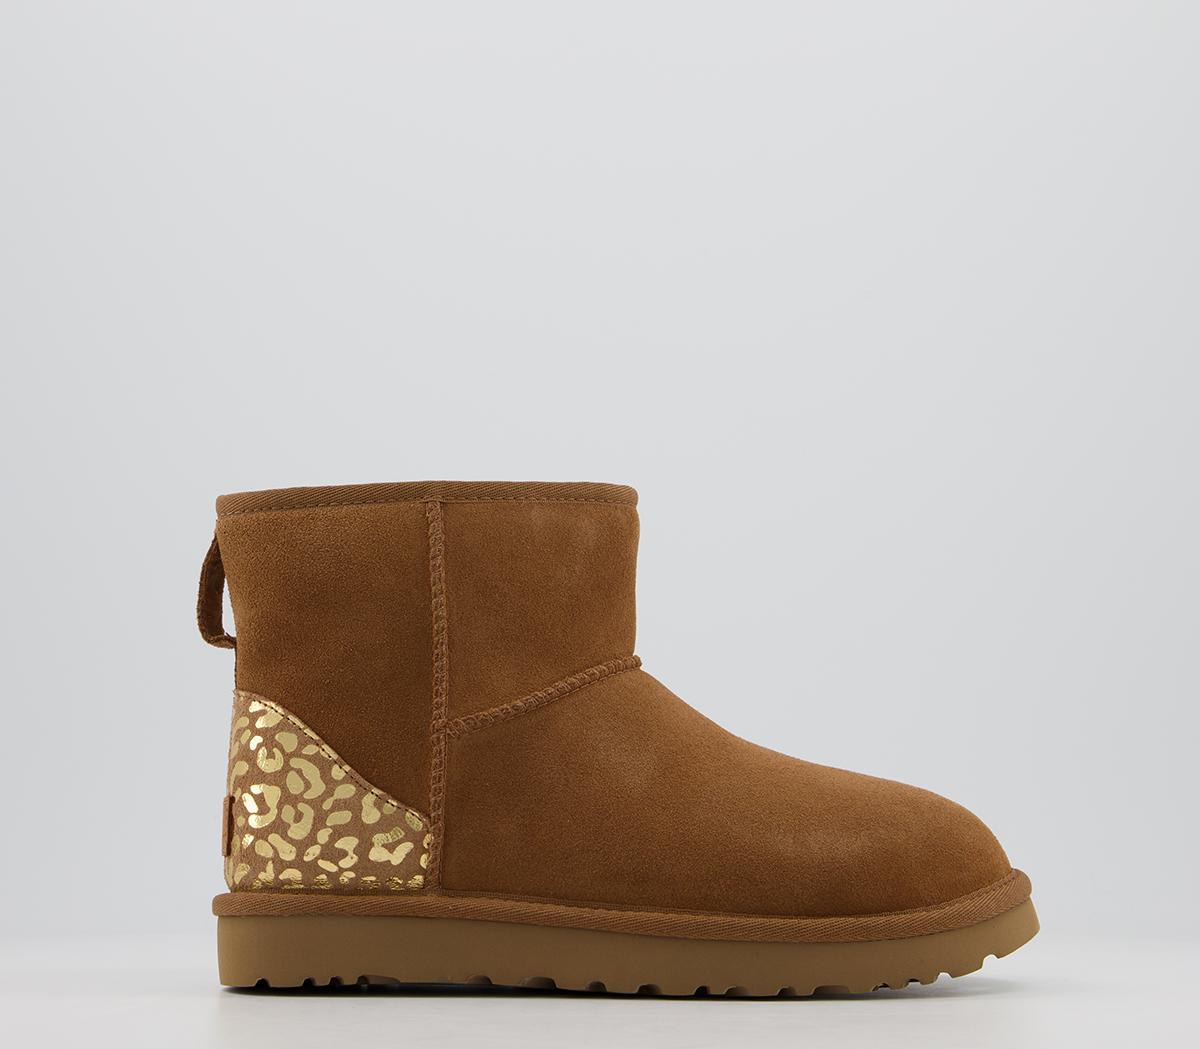 ugg boots leopard